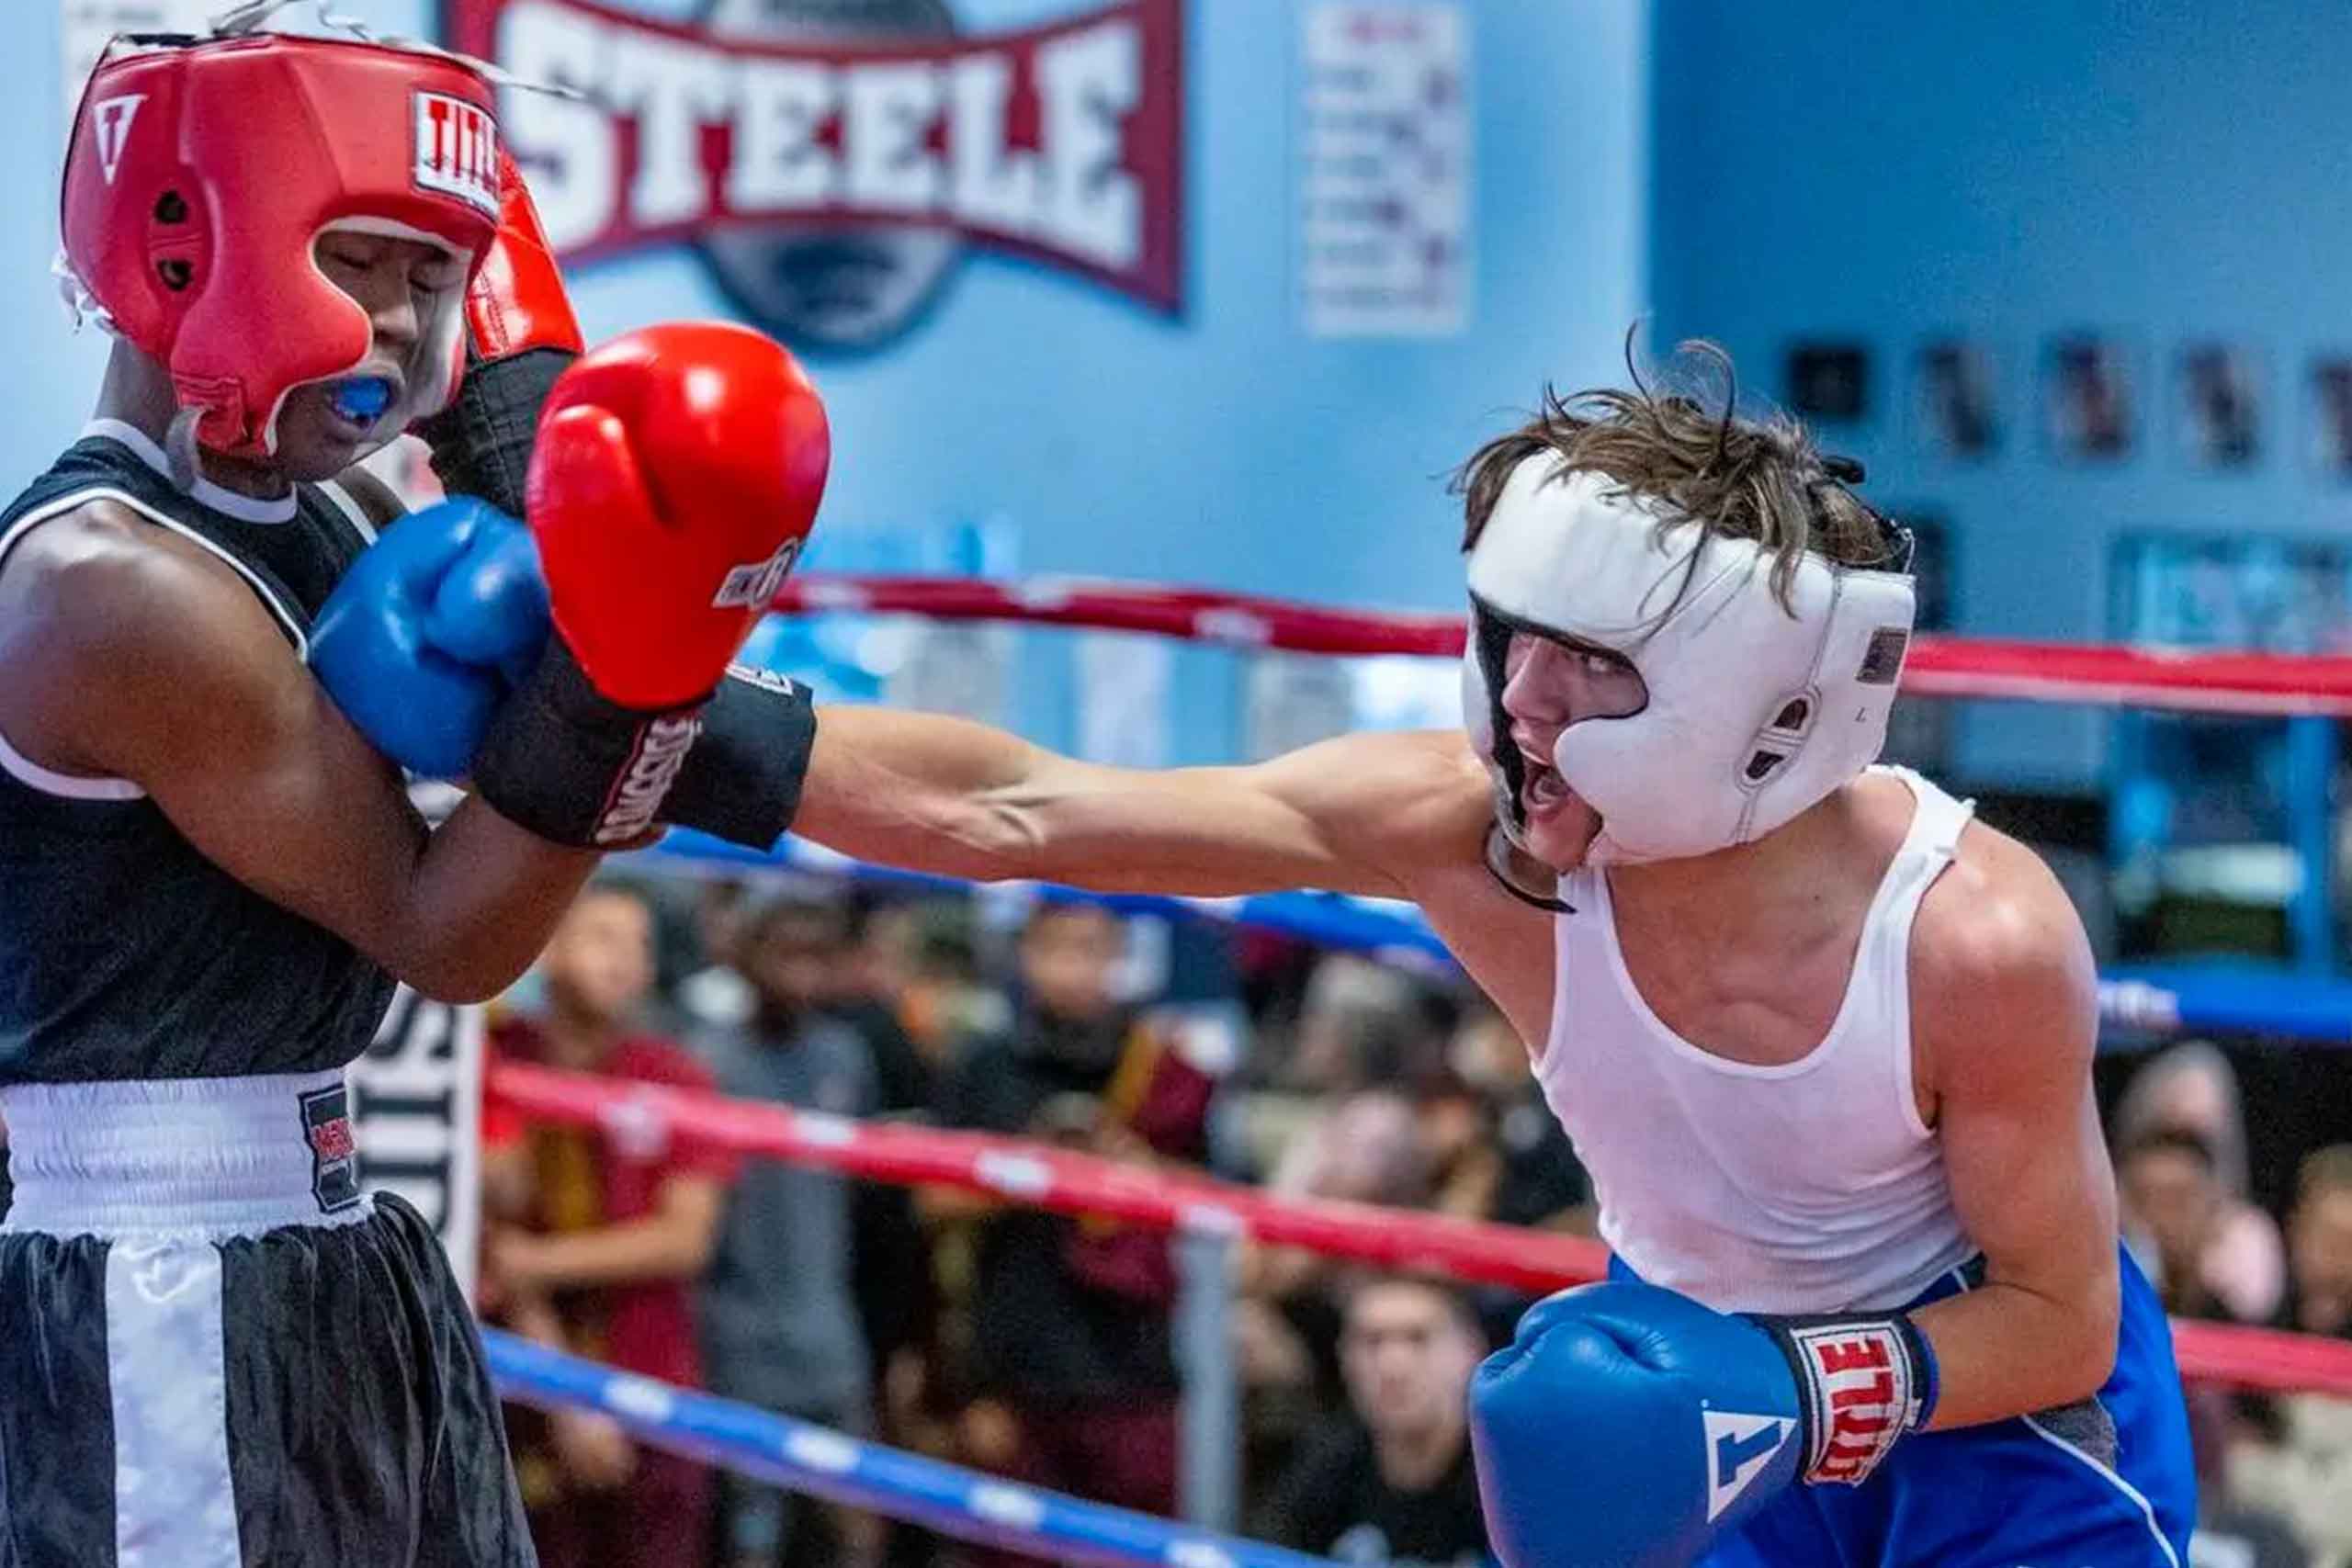 boxing fight event in Richard Steele's boxing gym Las Vegas